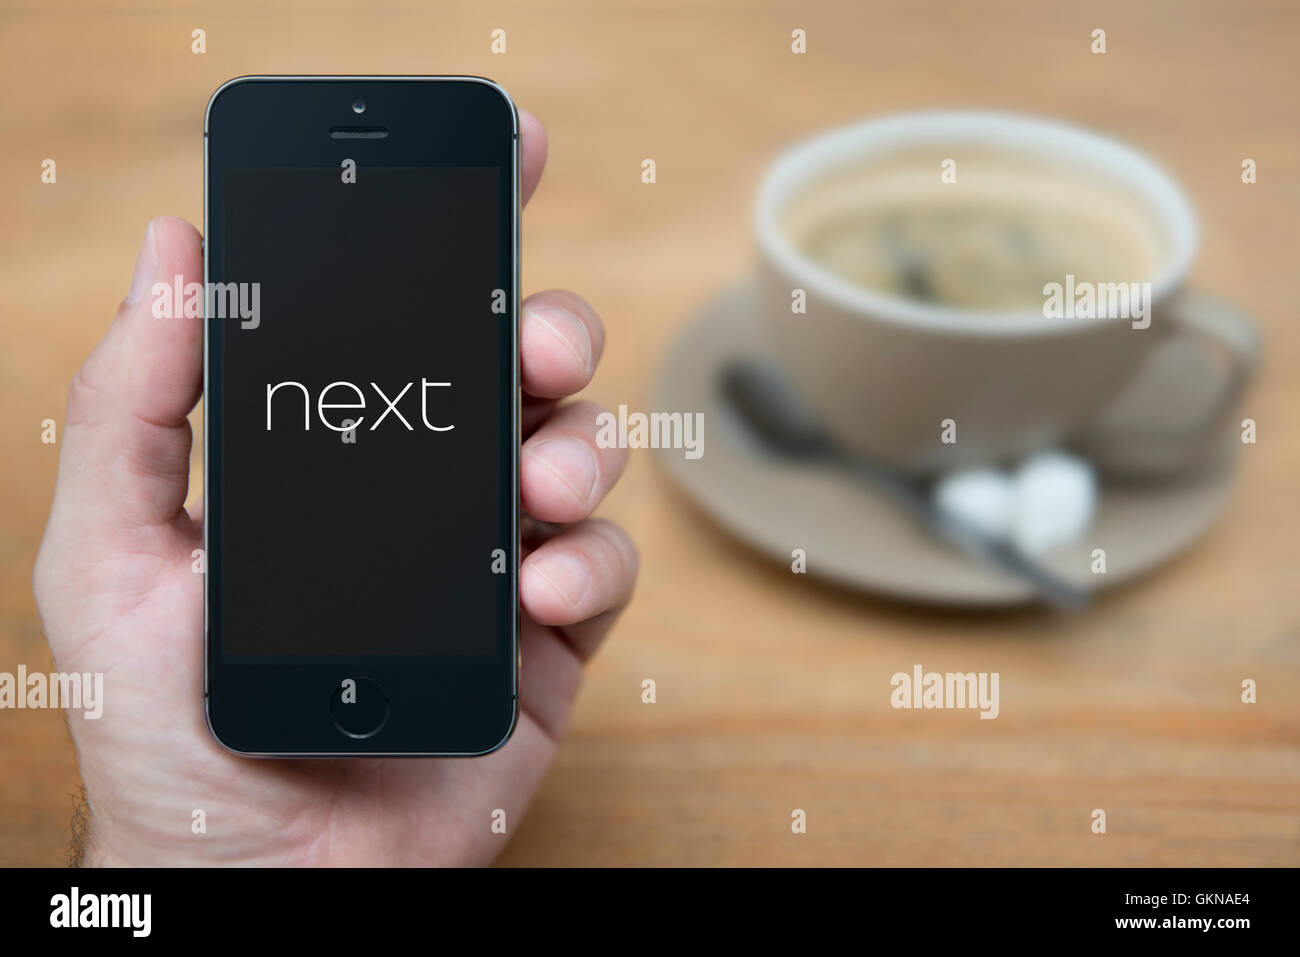 A man looks at his iPhone which displays the Next logo, while sat with a cup of coffee (Editorial use only). Stock Photo